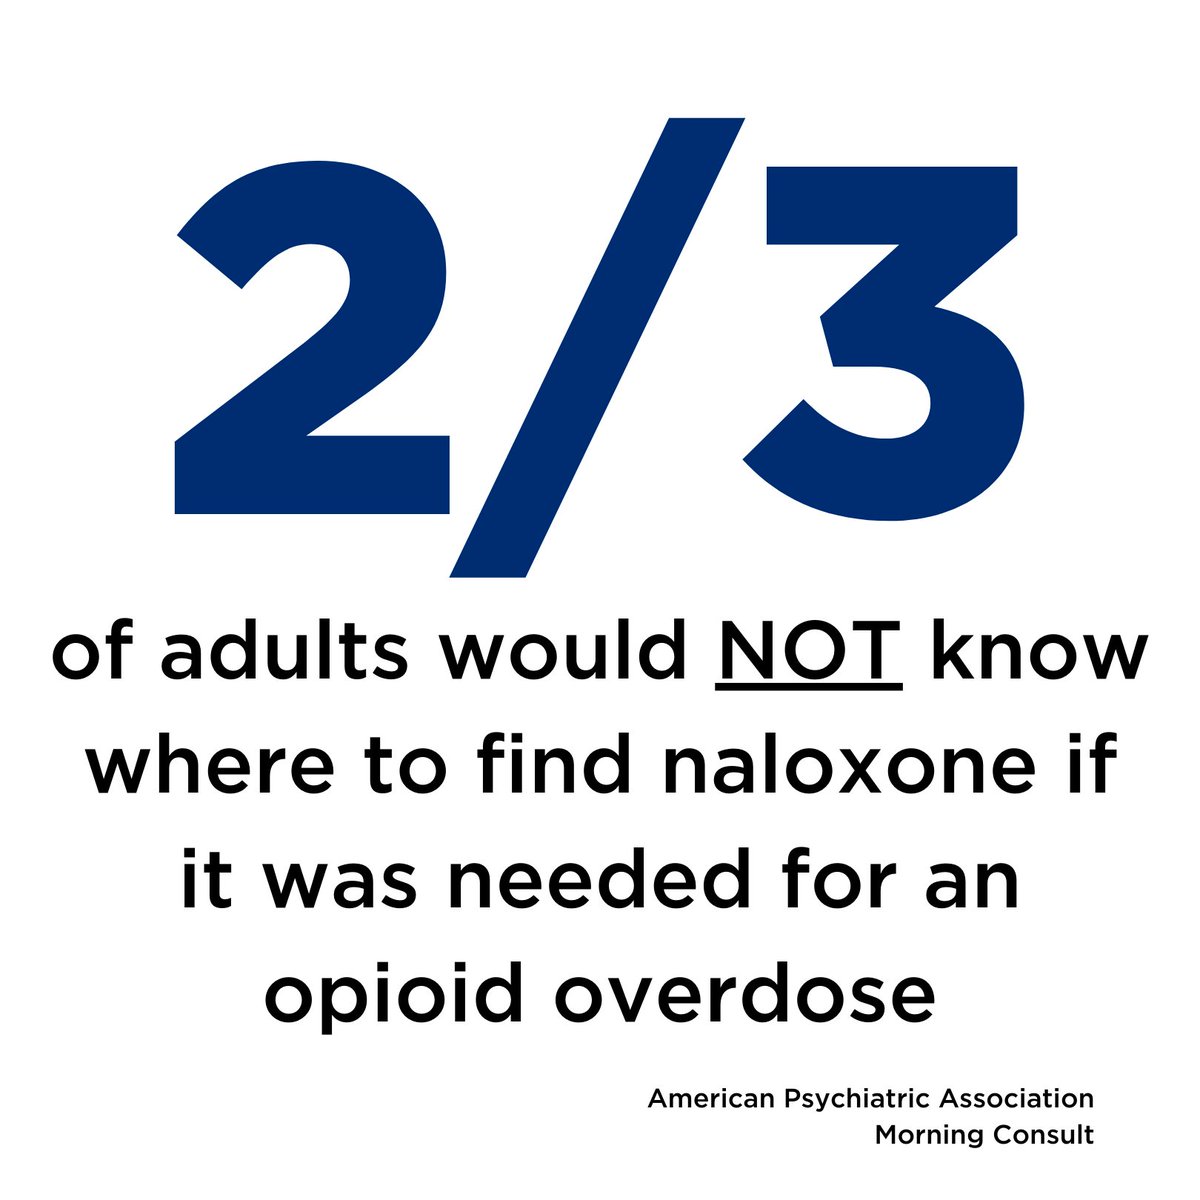 APA's new #HealthyMindsMonthly poll shows 2/3 of adults would NOT know where to find naloxone if it was needed for an opioid overdose. #addiction #addictionmedicine 

Read more: psychiatry.org/News-room/News…